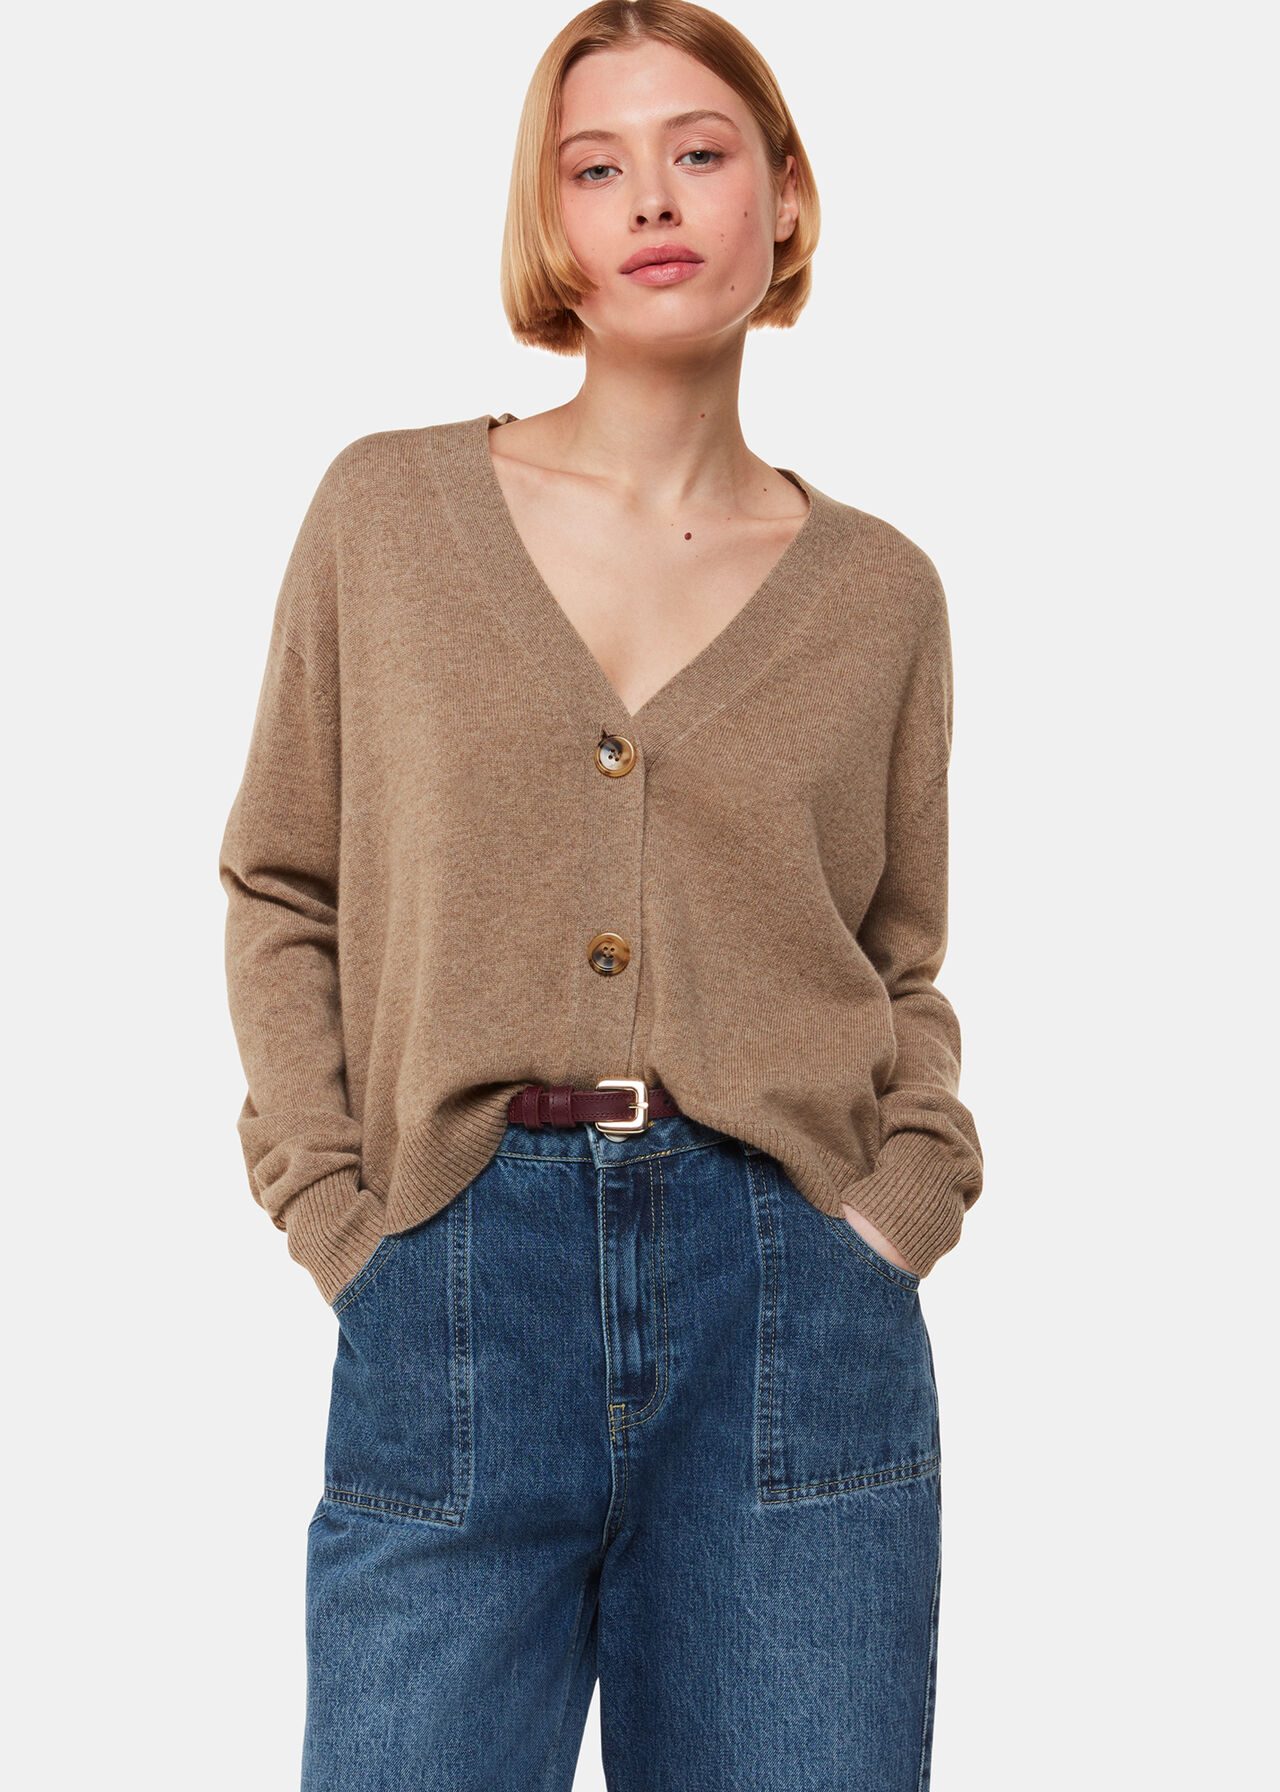 Come Talk To Me Cardigan, Oatmeal – Chic Soul